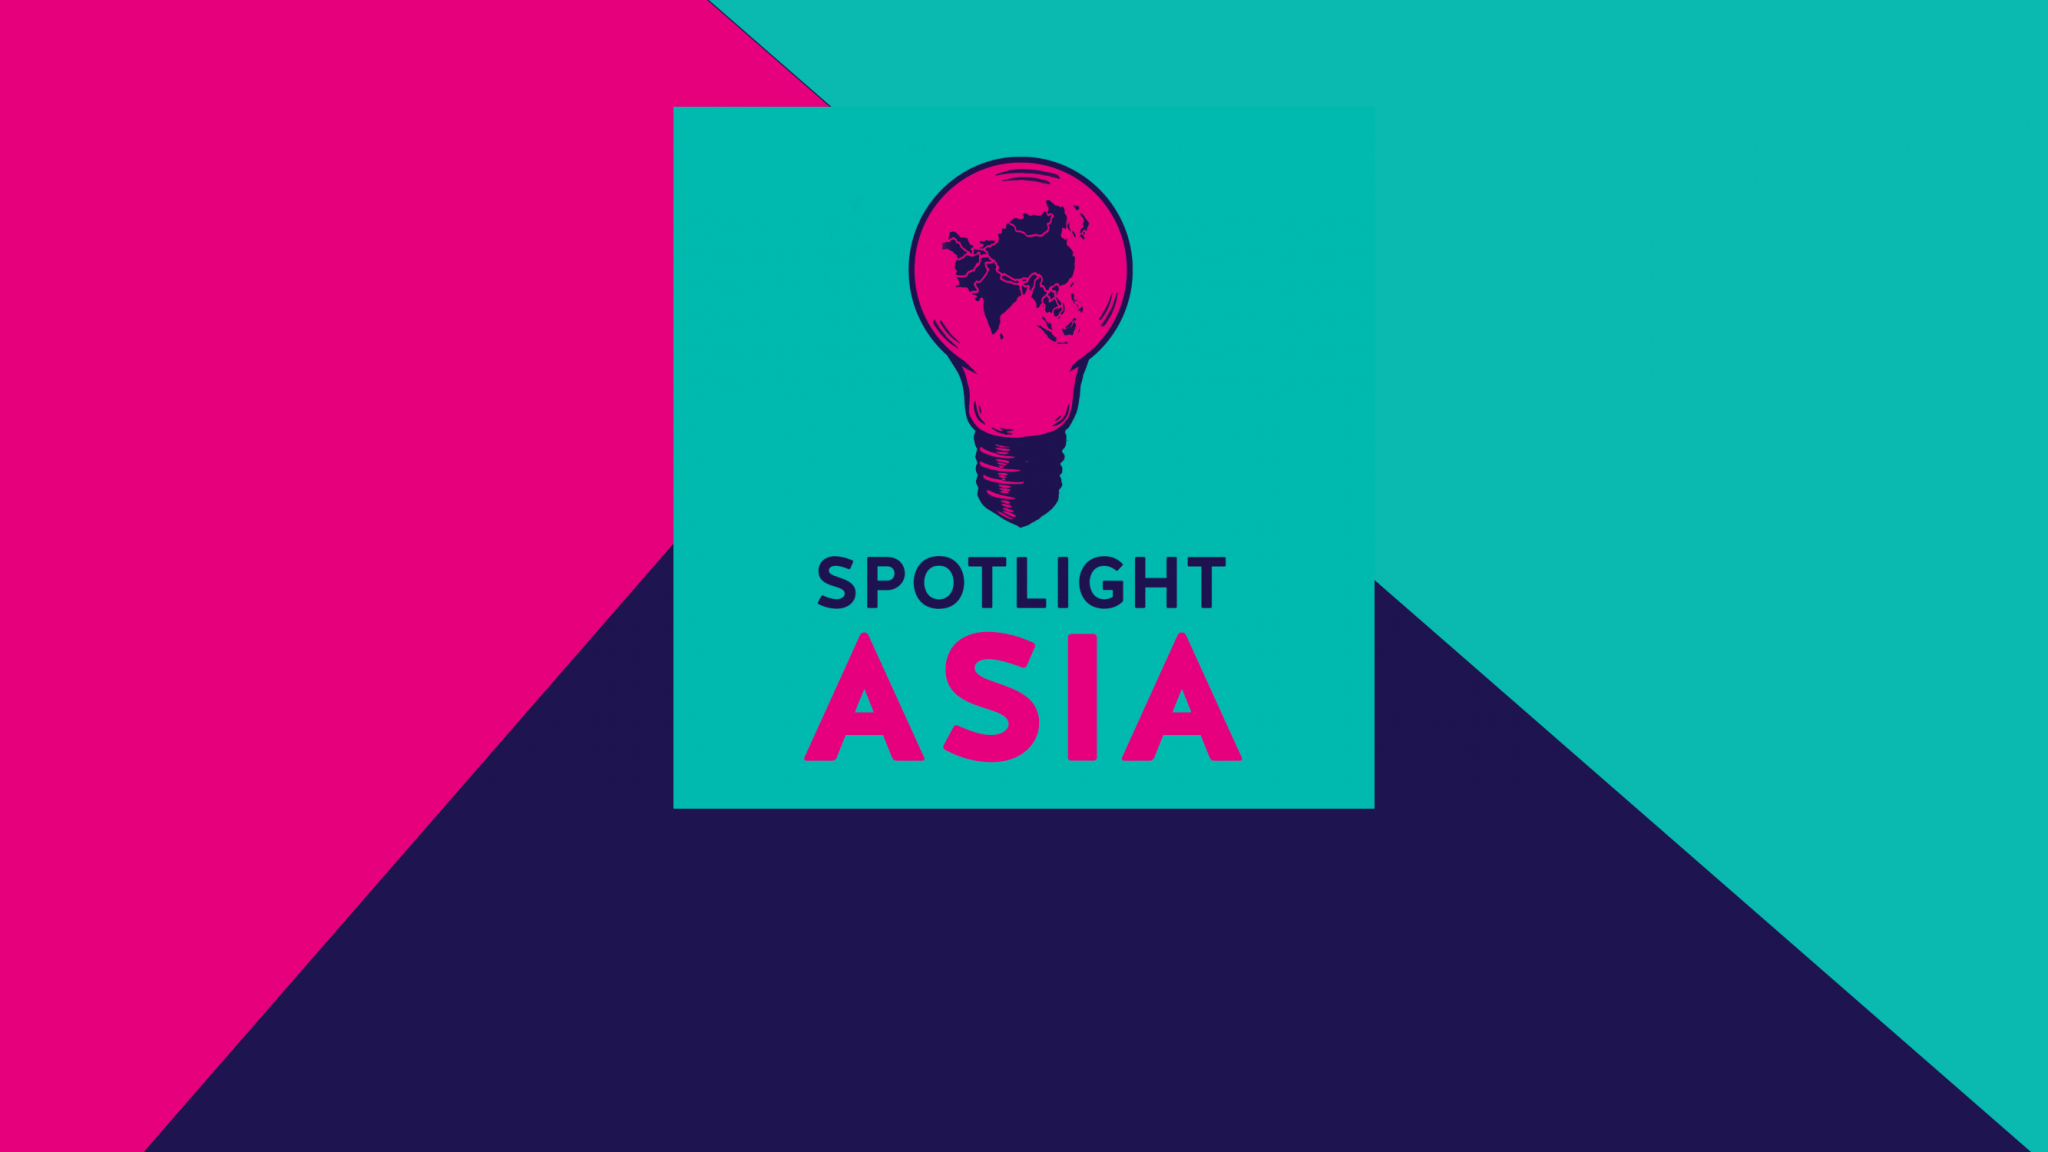 This episode of the Spotlight Asia podcast is about the Milk Tea Alliance, an online solidarity alliance, led by activists in Hong Kong, Taiwan, Thailand, Myanmar, the Philippines, Indonesie and Belarus. Our three guests are all active members of the Milk Tea Alliance and will enlighten us about how the alliance started and how its members organize themselves.